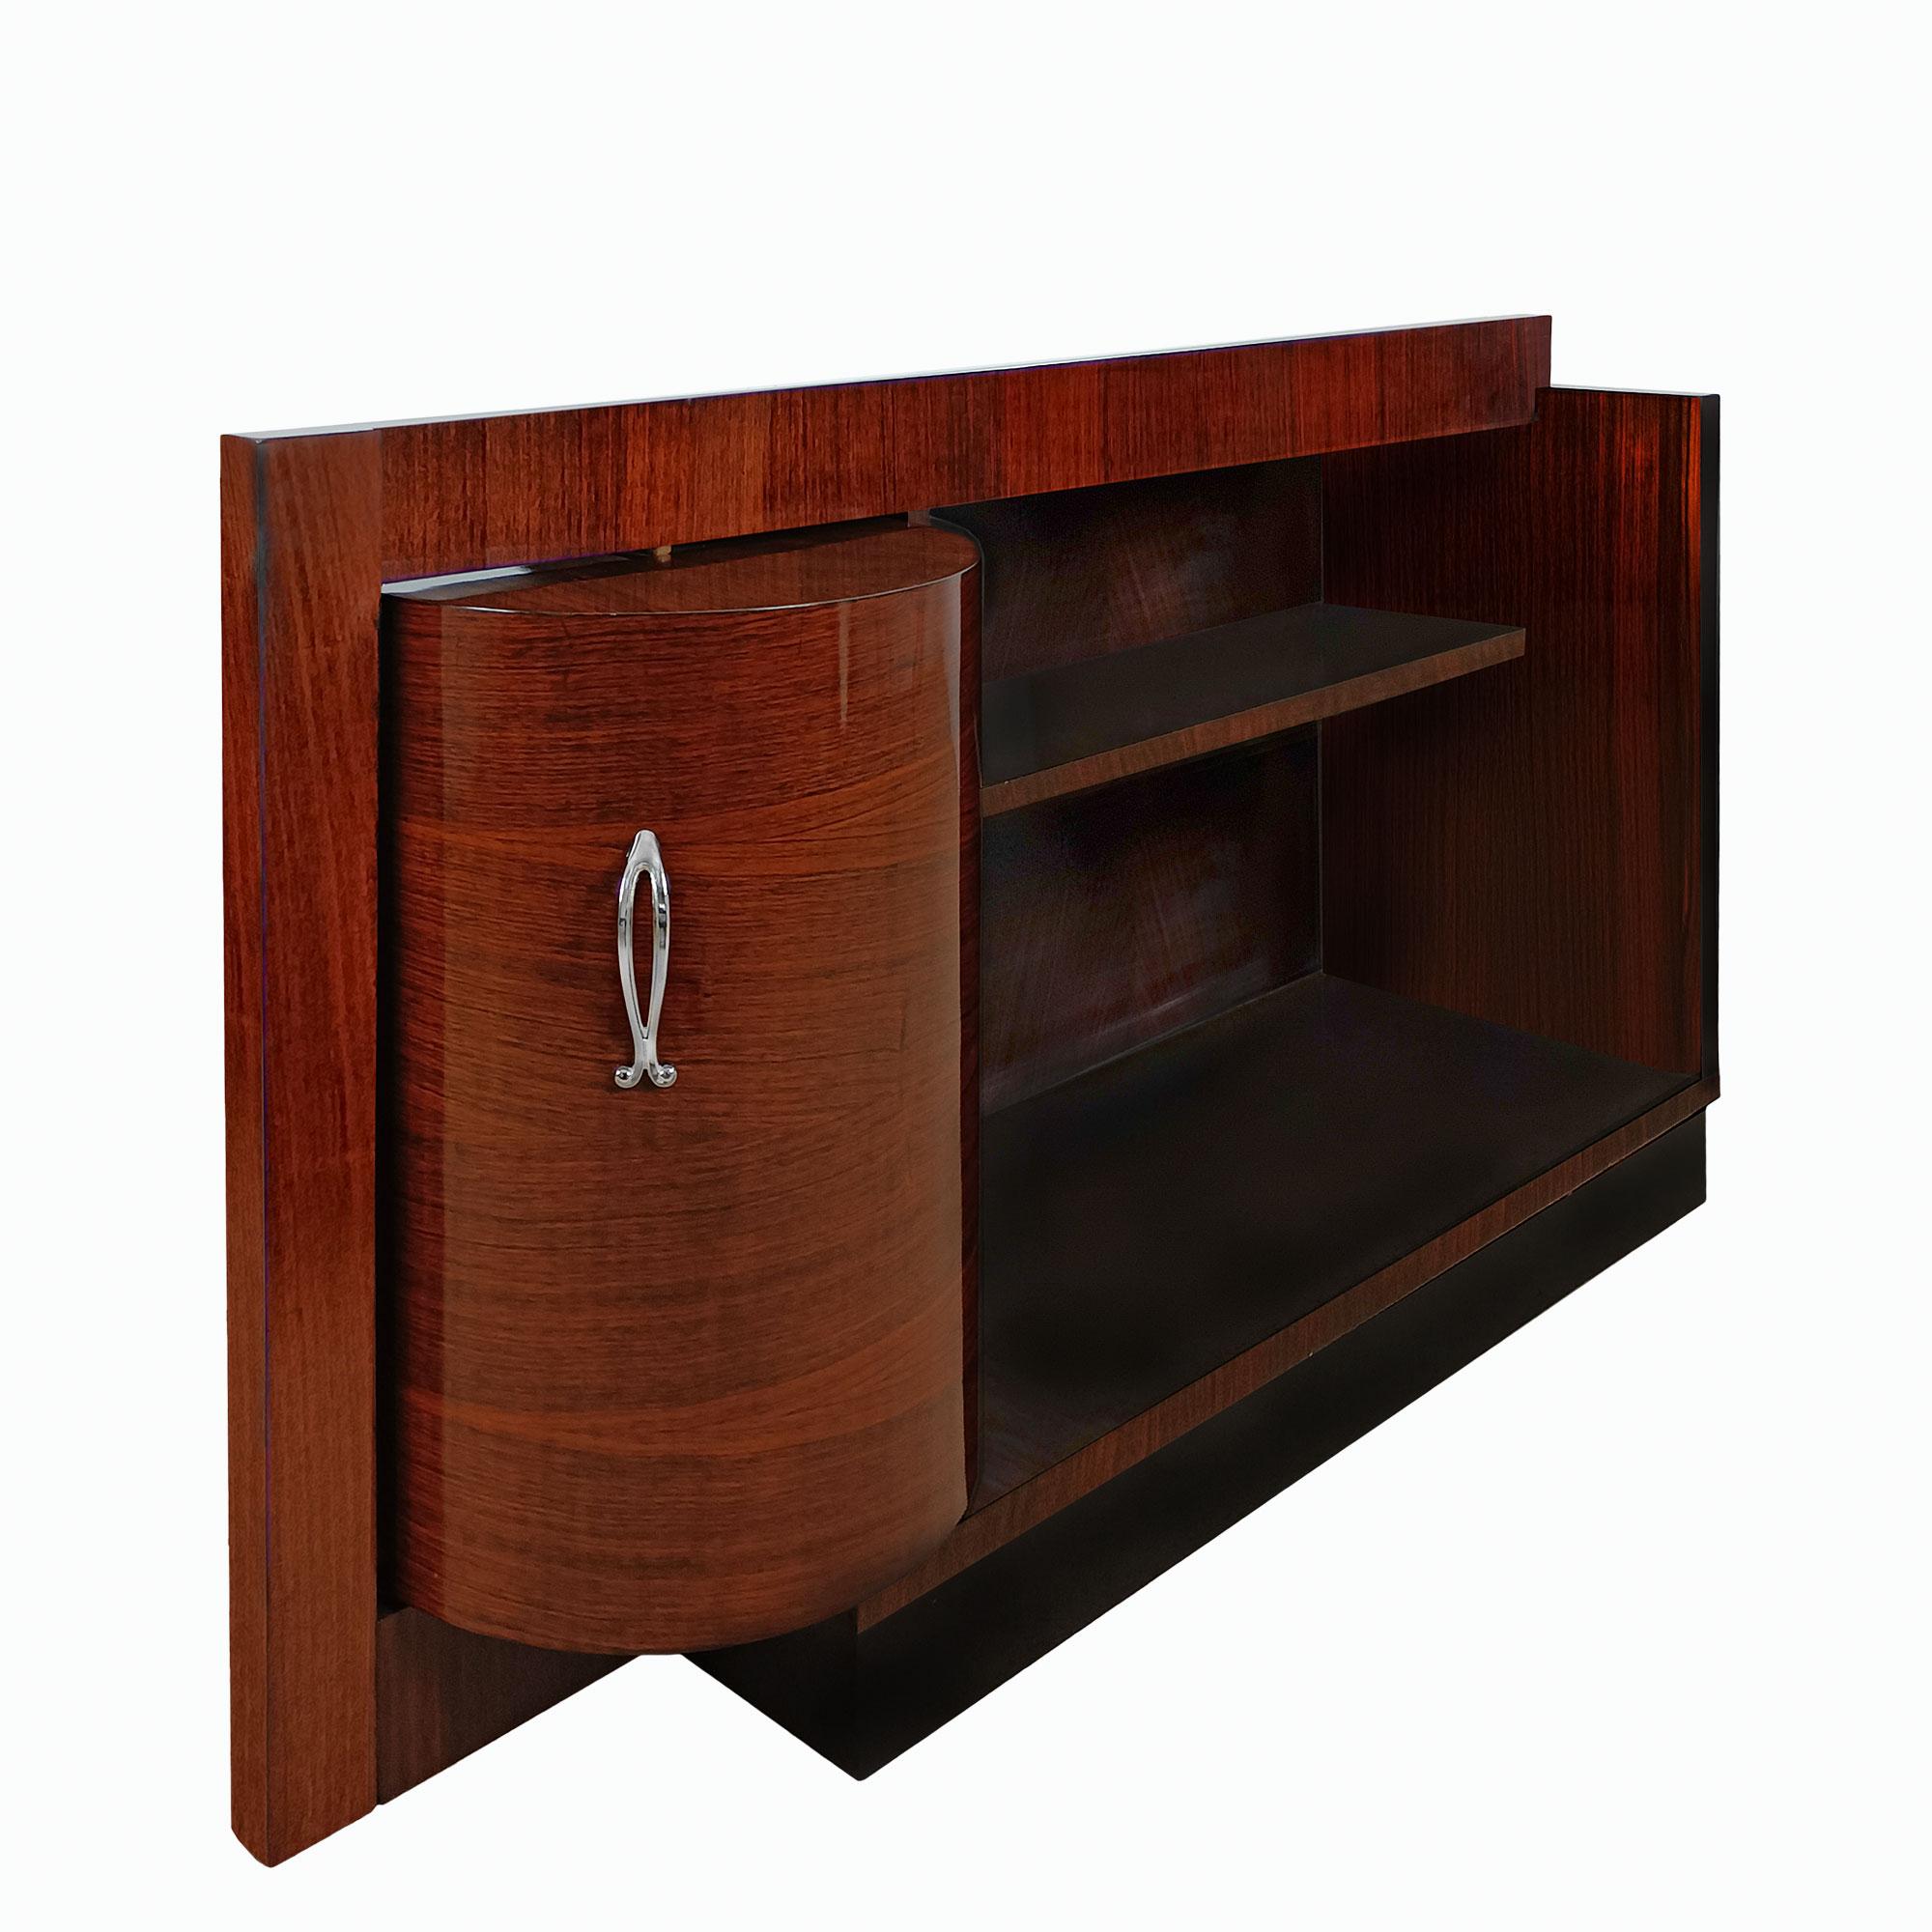 Art Deco dry bar or side cabinet in solid wood with rosewood veneer and black lacquered base. The tambour door opens onto a lemon veneered compartment for bottles and glasses, the oak hooks and their trays rotate around a central axis. Veneered and